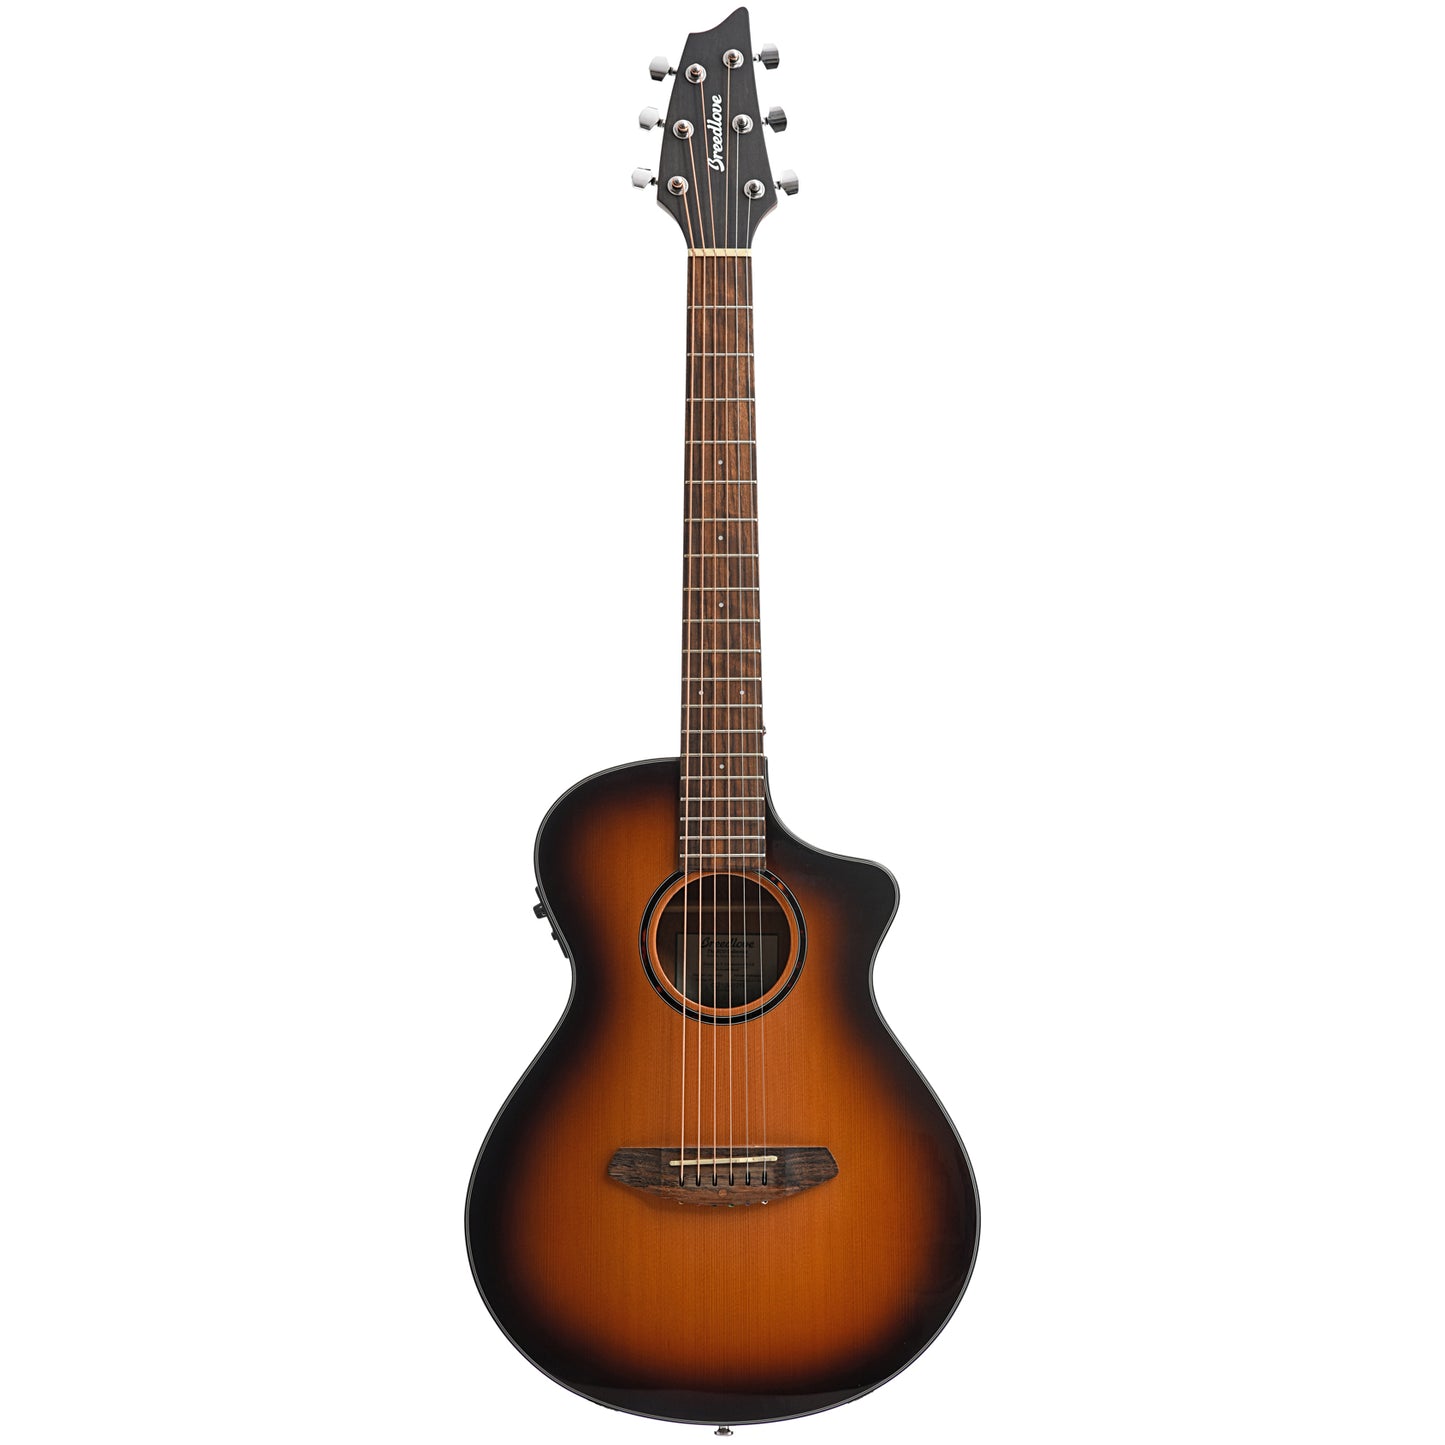 Image 3 of Breedlove Discovery S Companion Edgeburst CE Red Cedar-African Mahogany Acoustic-Electric Guitar - SKU# DSCP44CERCAM : Product Type Flat-top Guitars : Elderly Instruments